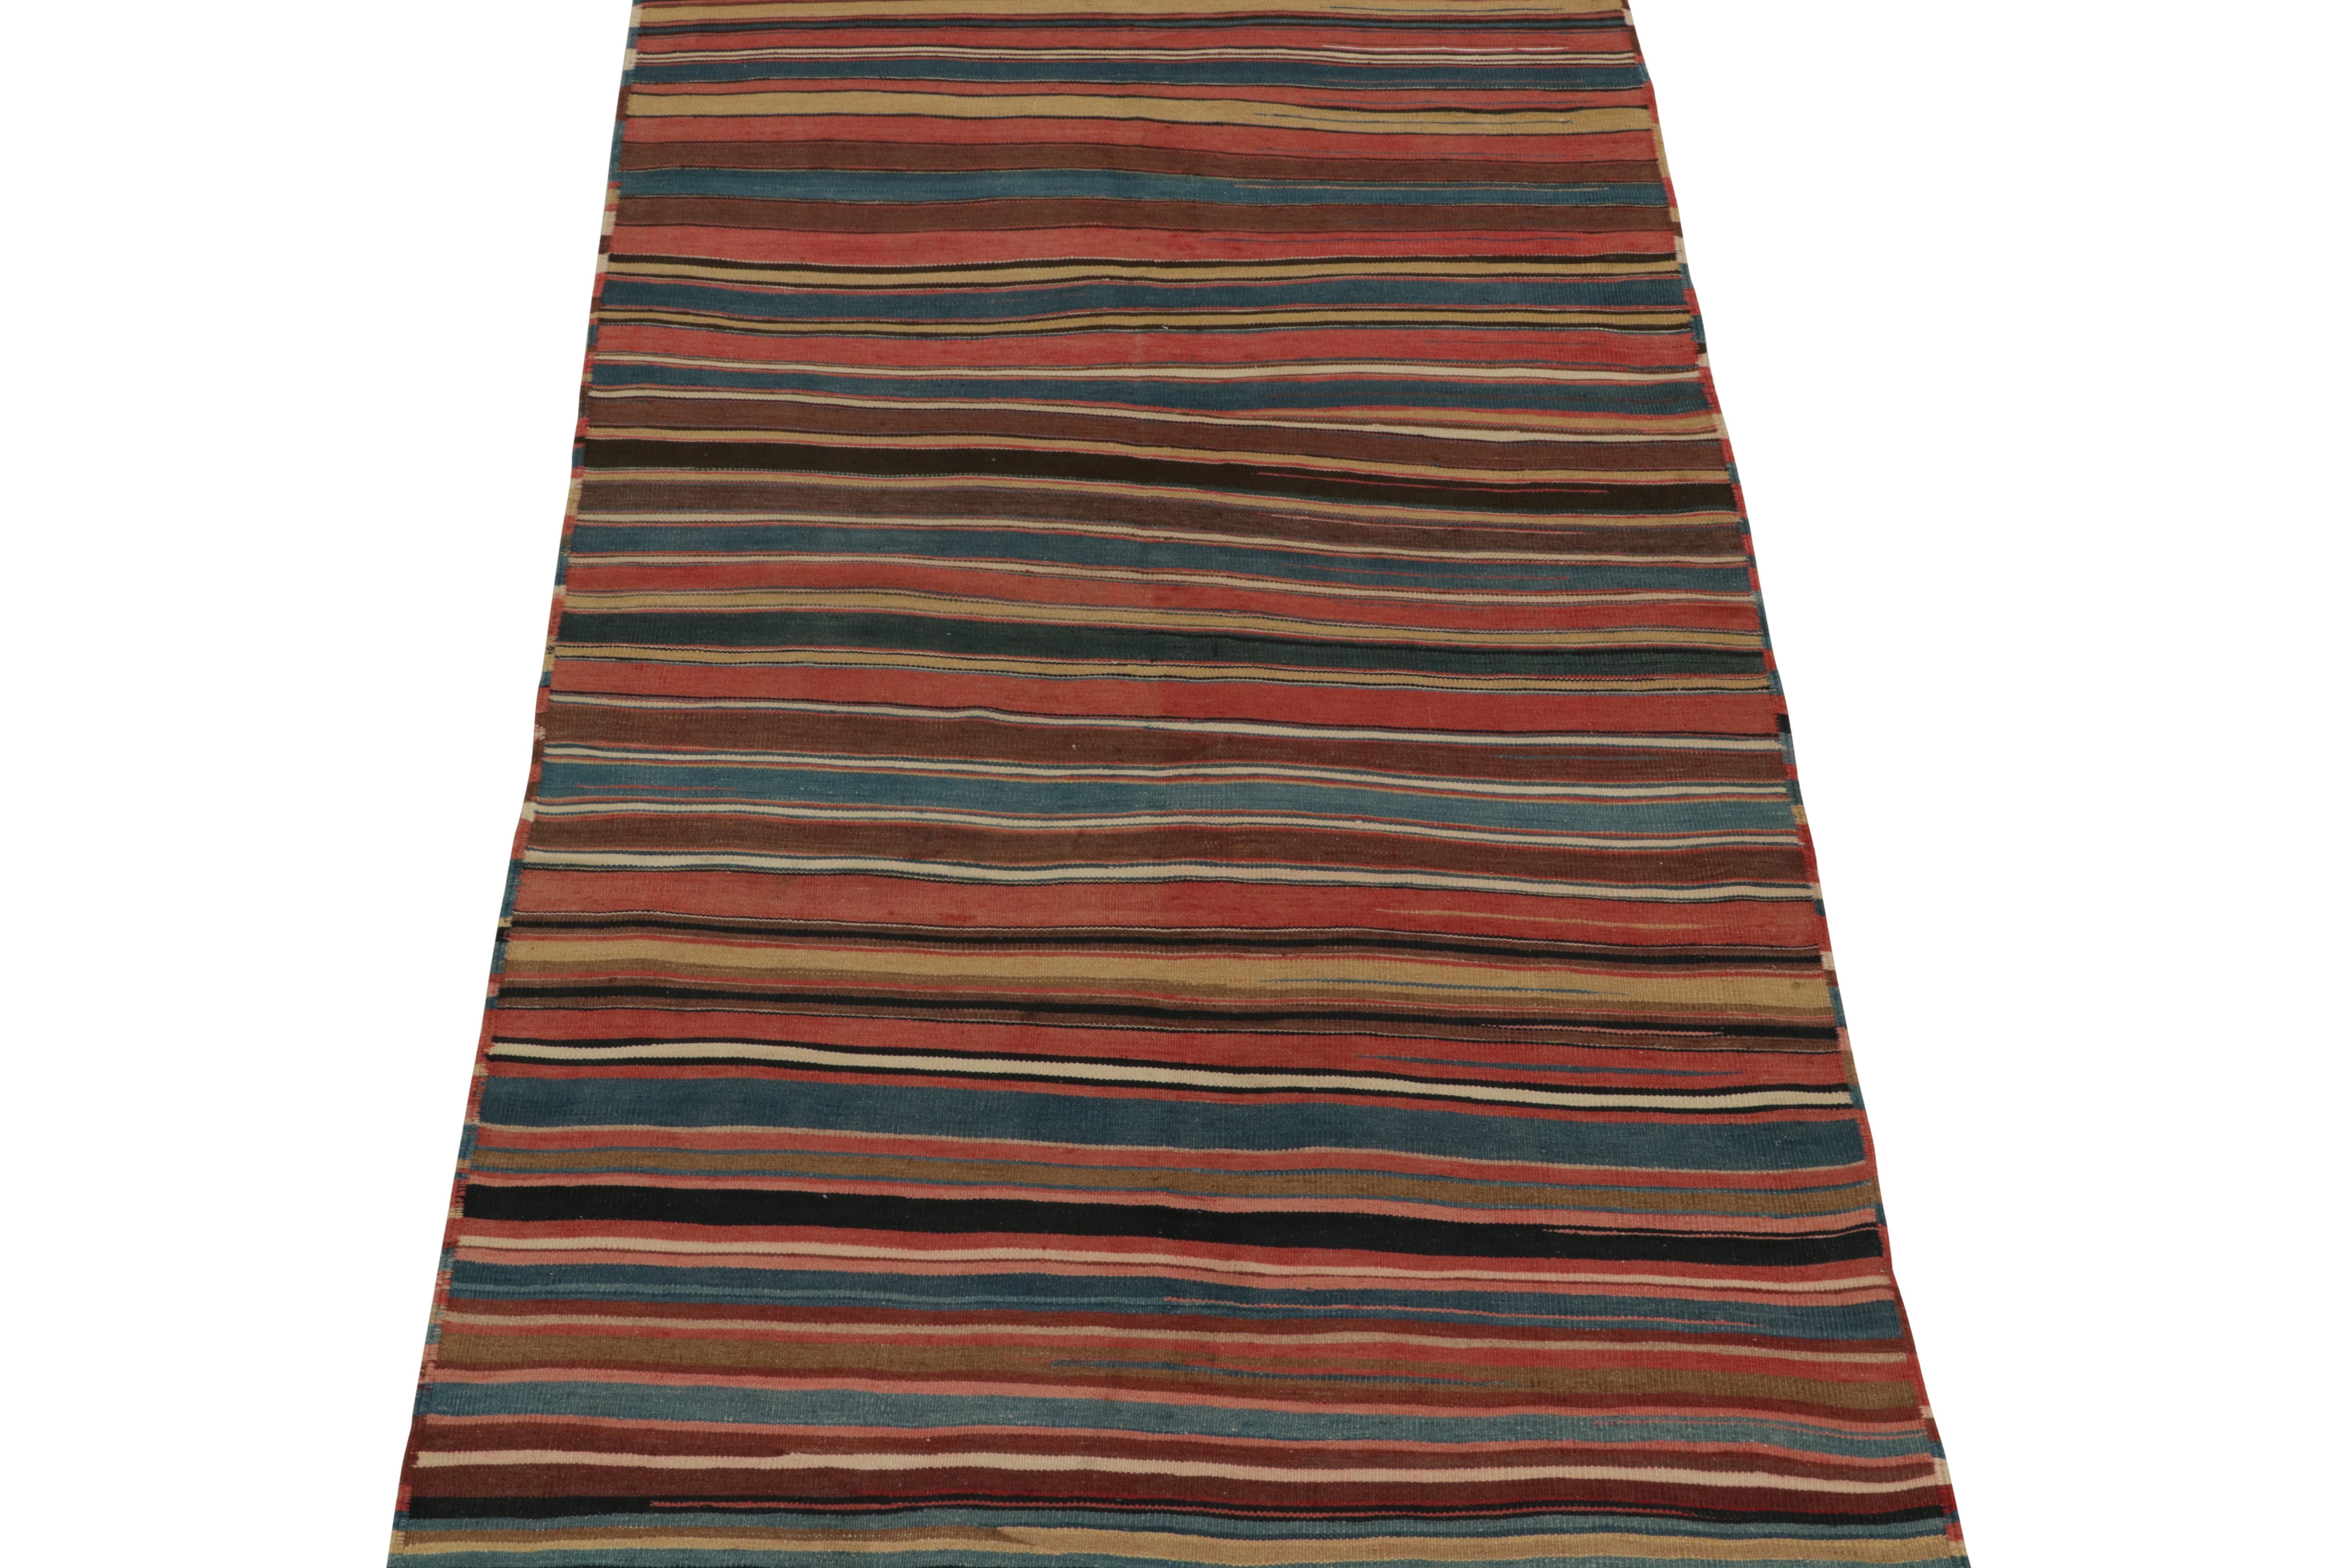 This vintage 5x9 Persian kilim is a unique tribal rug for its period and provenance. Handwoven in wool, it’s believed to be of Shahsavan provenance and originates circa 1950-1960. 

Further on the Design:

The field hosts horizontal stripes